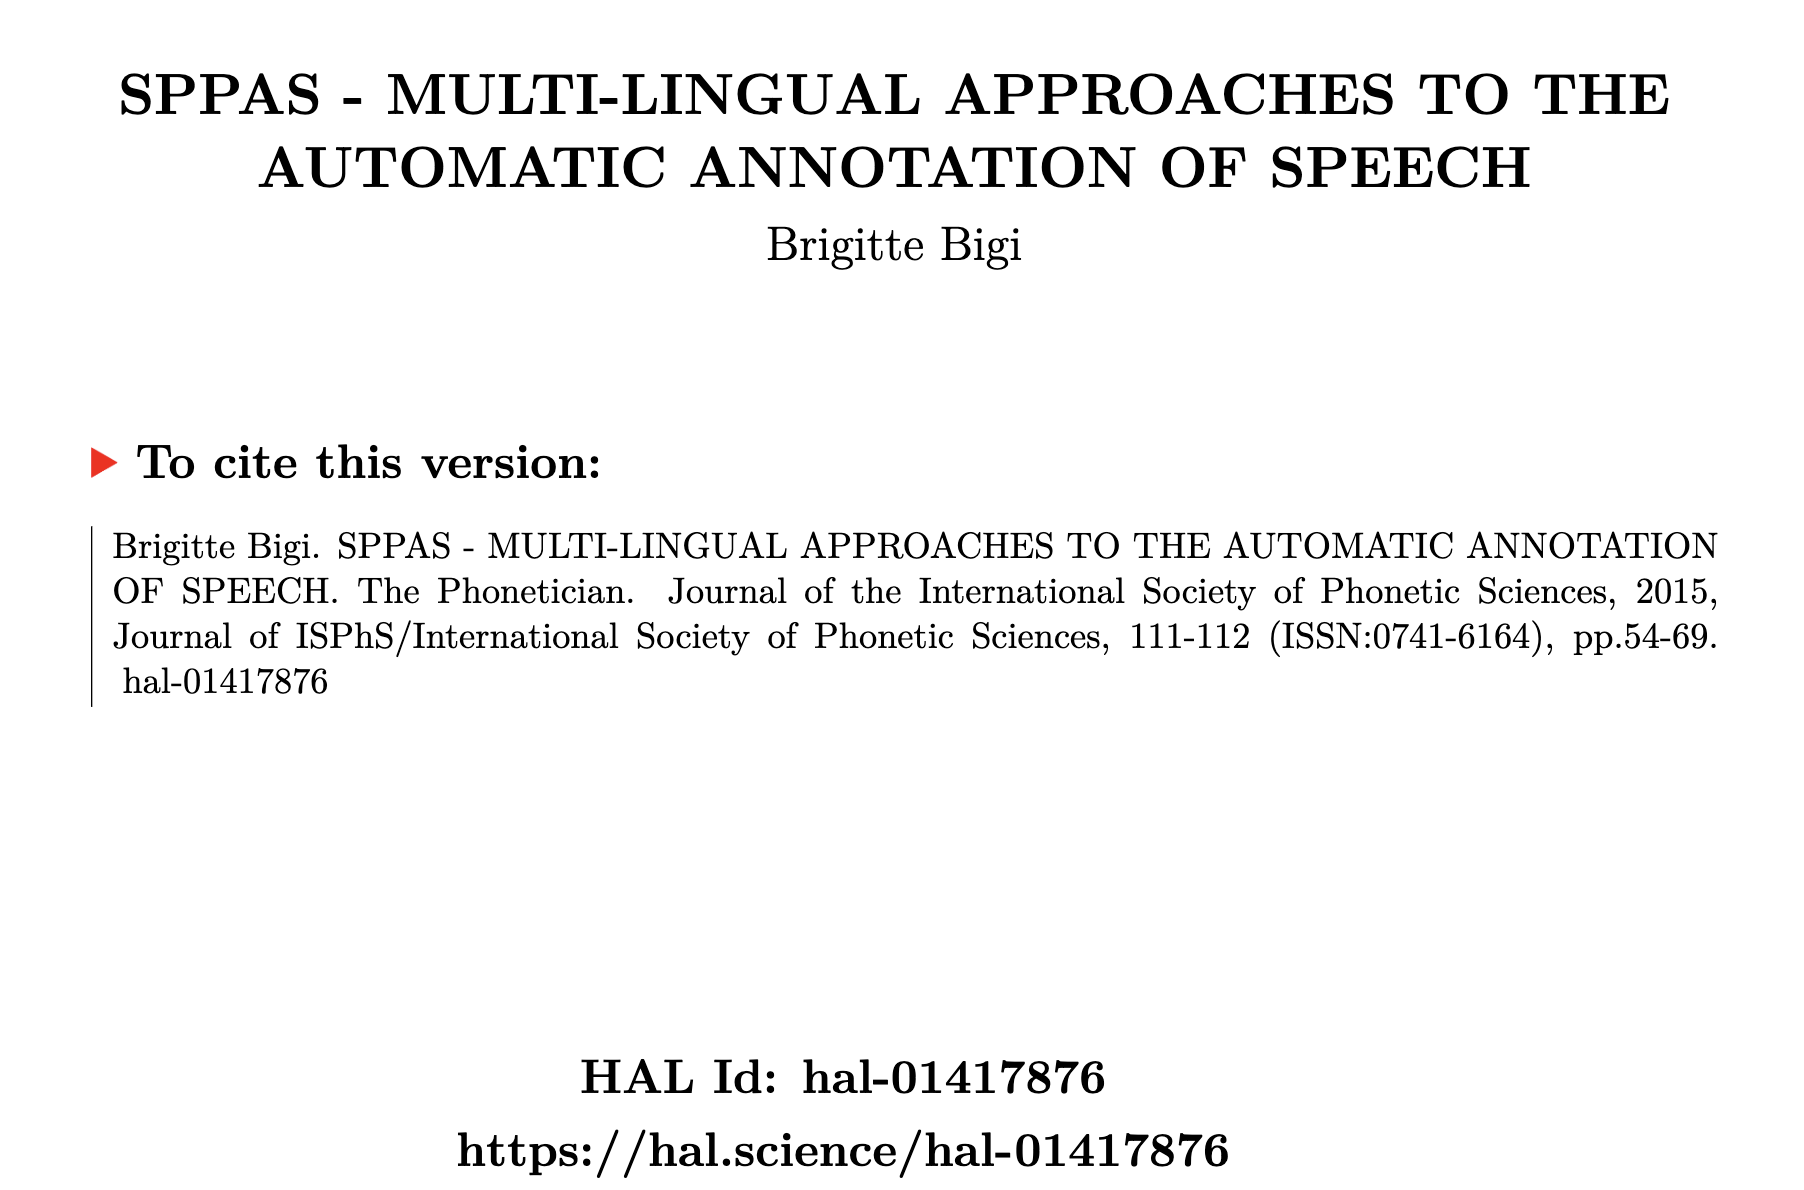 SPPAS - Multi-lingual Approaches to the Automatic Annotation of Speech